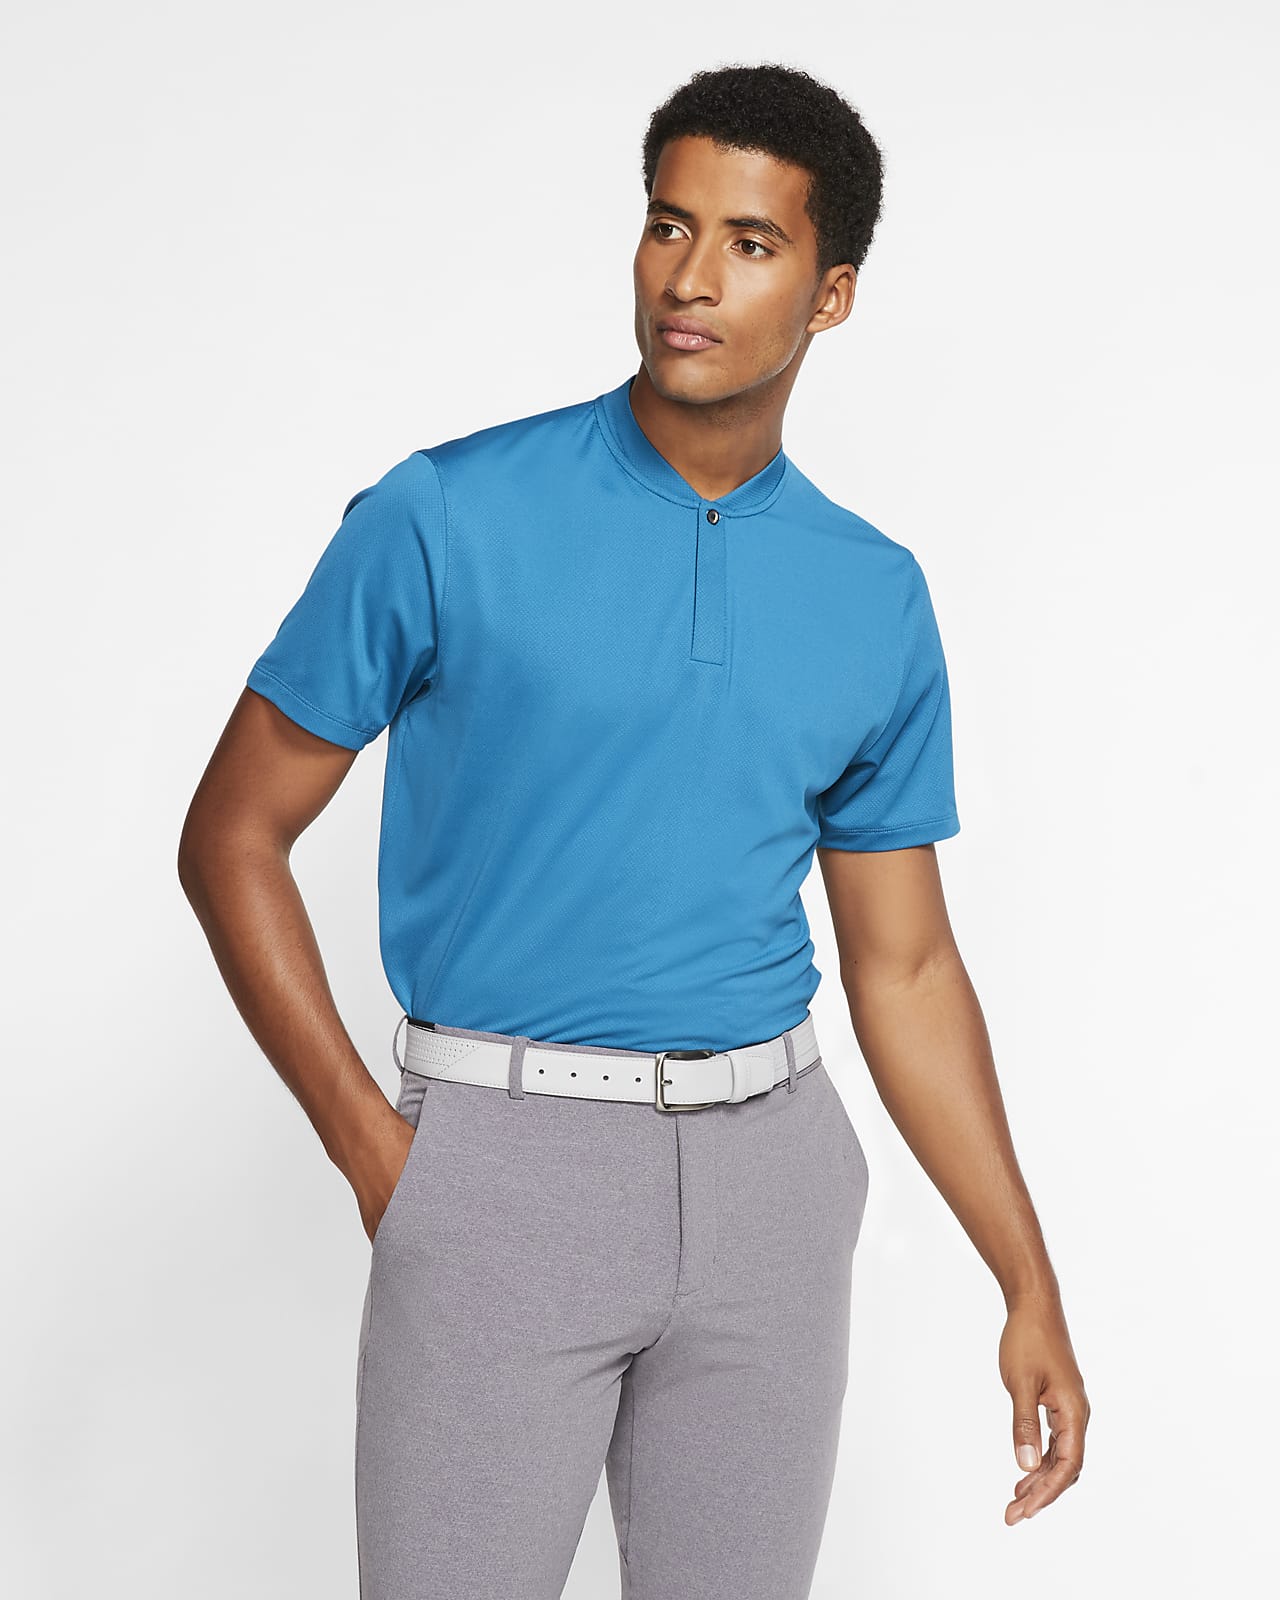 tiger woods green polo